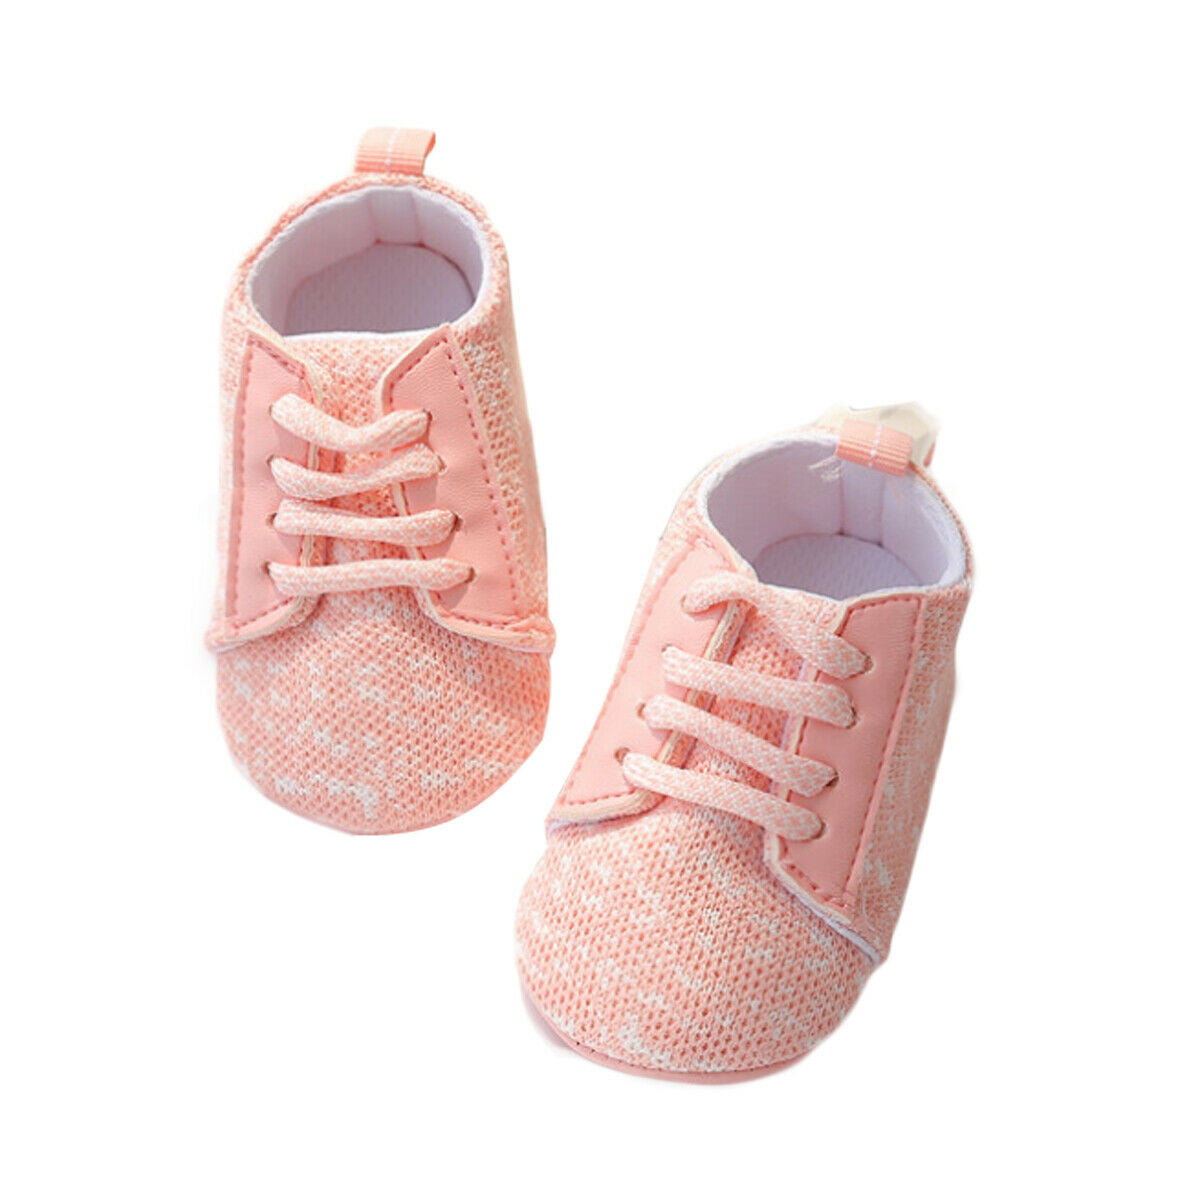 Mlpeerw Infant Baby Sneakers Sole Lace 